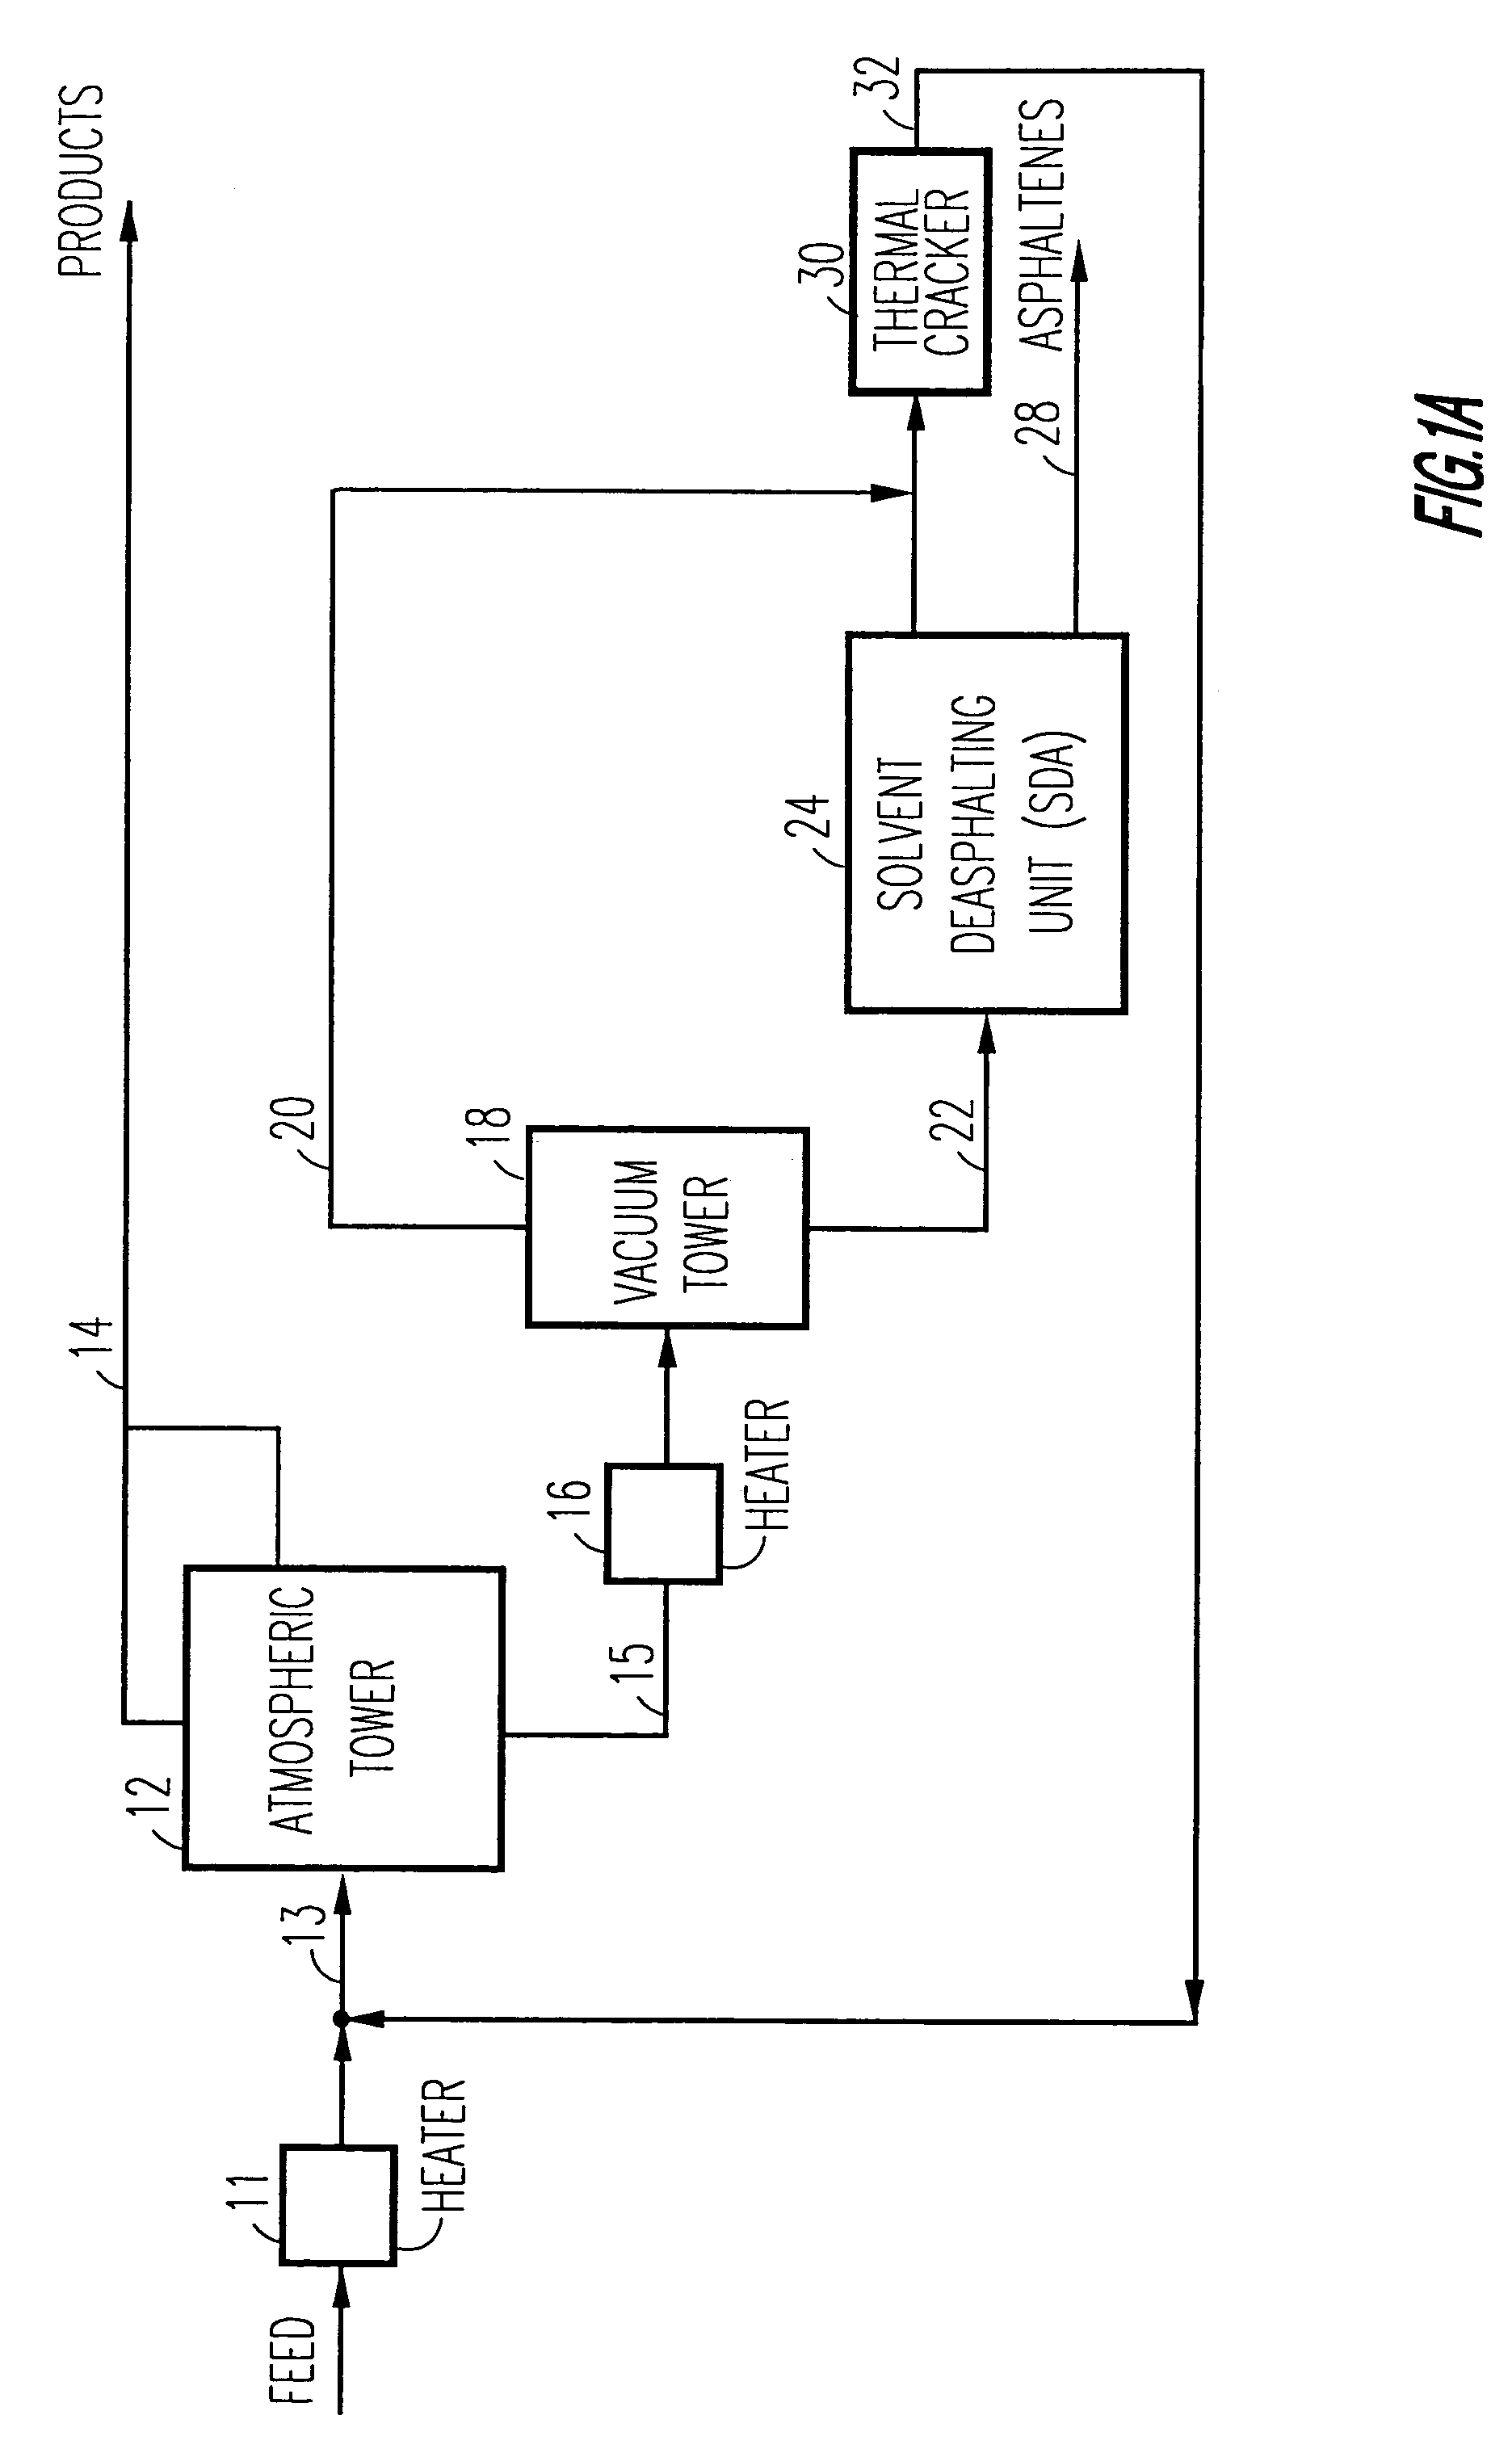 Method of and apparatus for processing heavy hydrocarbon feeds